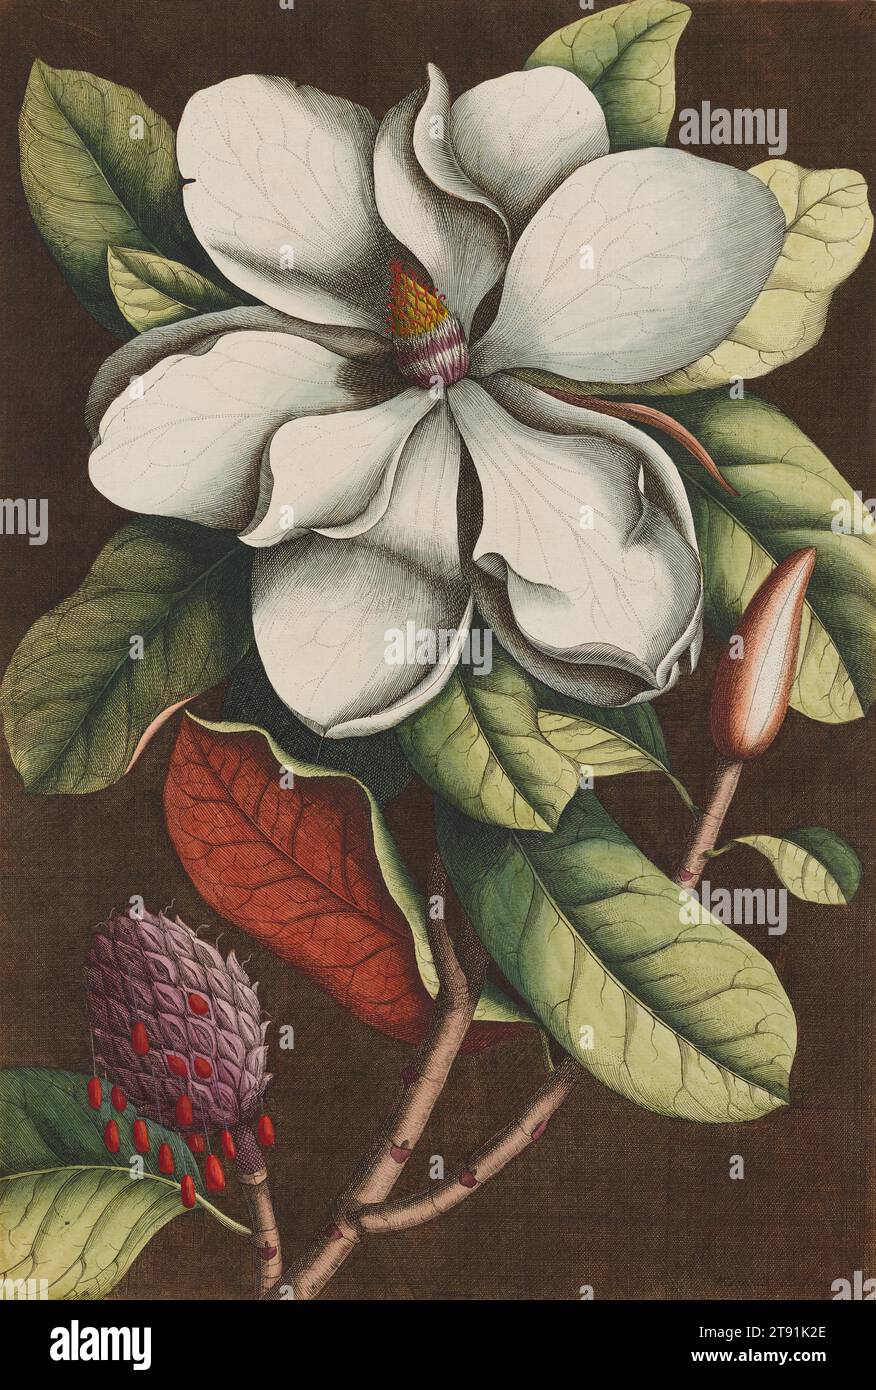 Magnolia grandiflora (The Laurel Tree of Carolina), c. 1743 (3rd ed. 1771), Georg Dionysius Ehret; Etcher: Georg Dionysius Ehret; Publisher: Mark Catesby, English, 1682/83 - 1749, 19 1/2 x 13 in. (49.53 x 33.02 cm) (sheet, margins cut), Hand-colored etching, England, 18th century, Mark Catesby's Natural History was the first published account of the plants and animals of North America. It was also the first natural history book to include large-scale color plates. He lived in Virginia from 1712 to 1719 and in Carolina from 1722 to 1726. Stock Photo